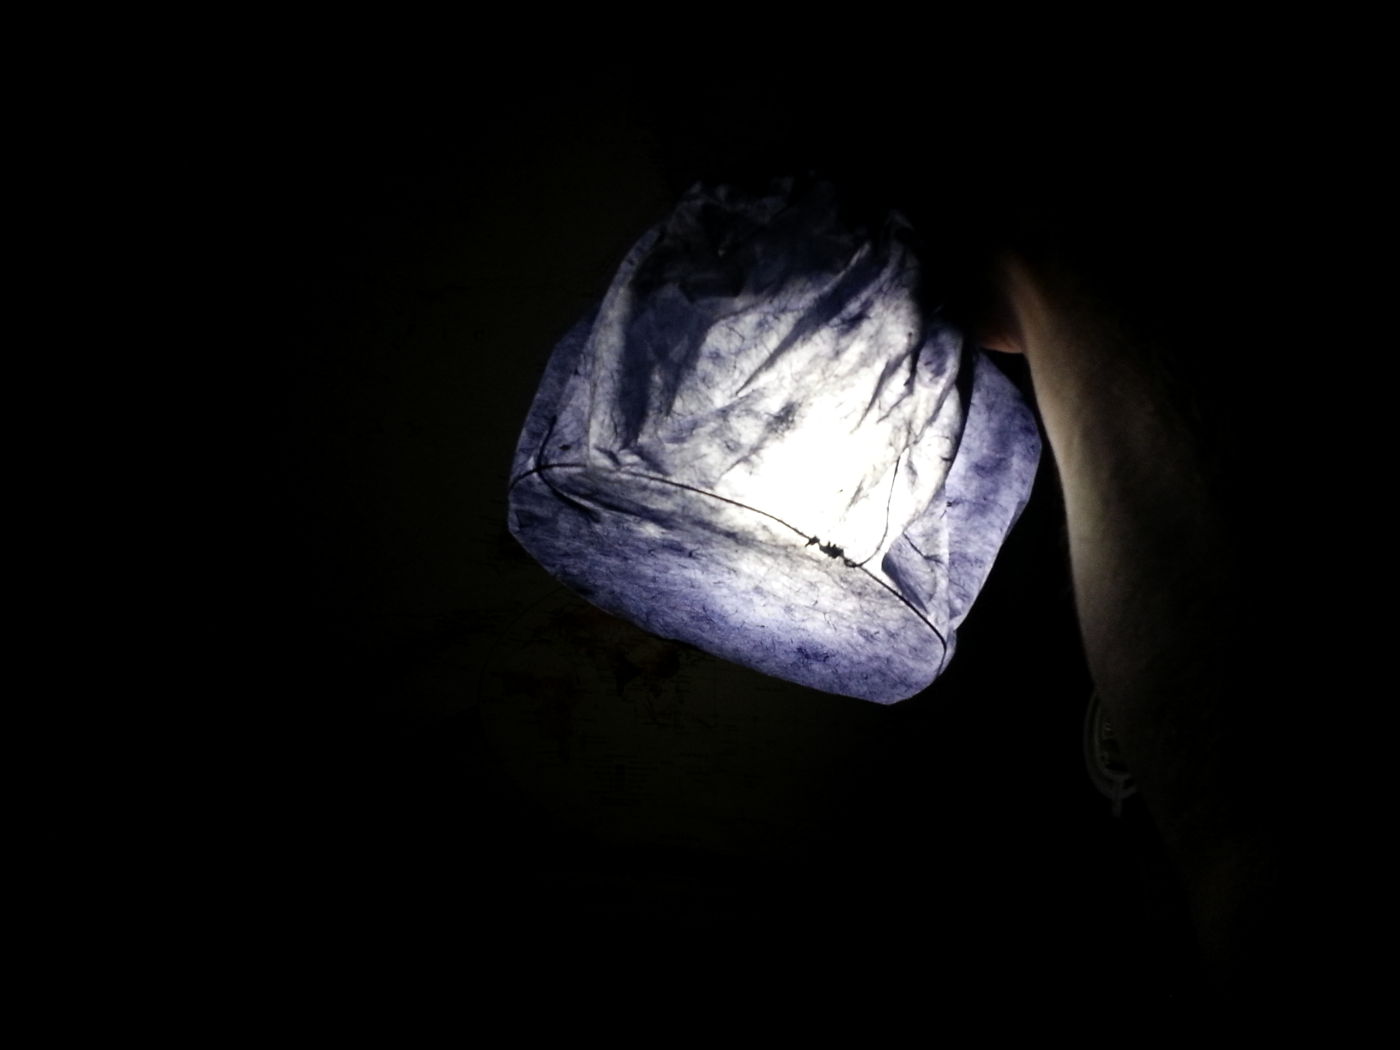 In the dark, a bunch of lanterns could replace a bed lamp